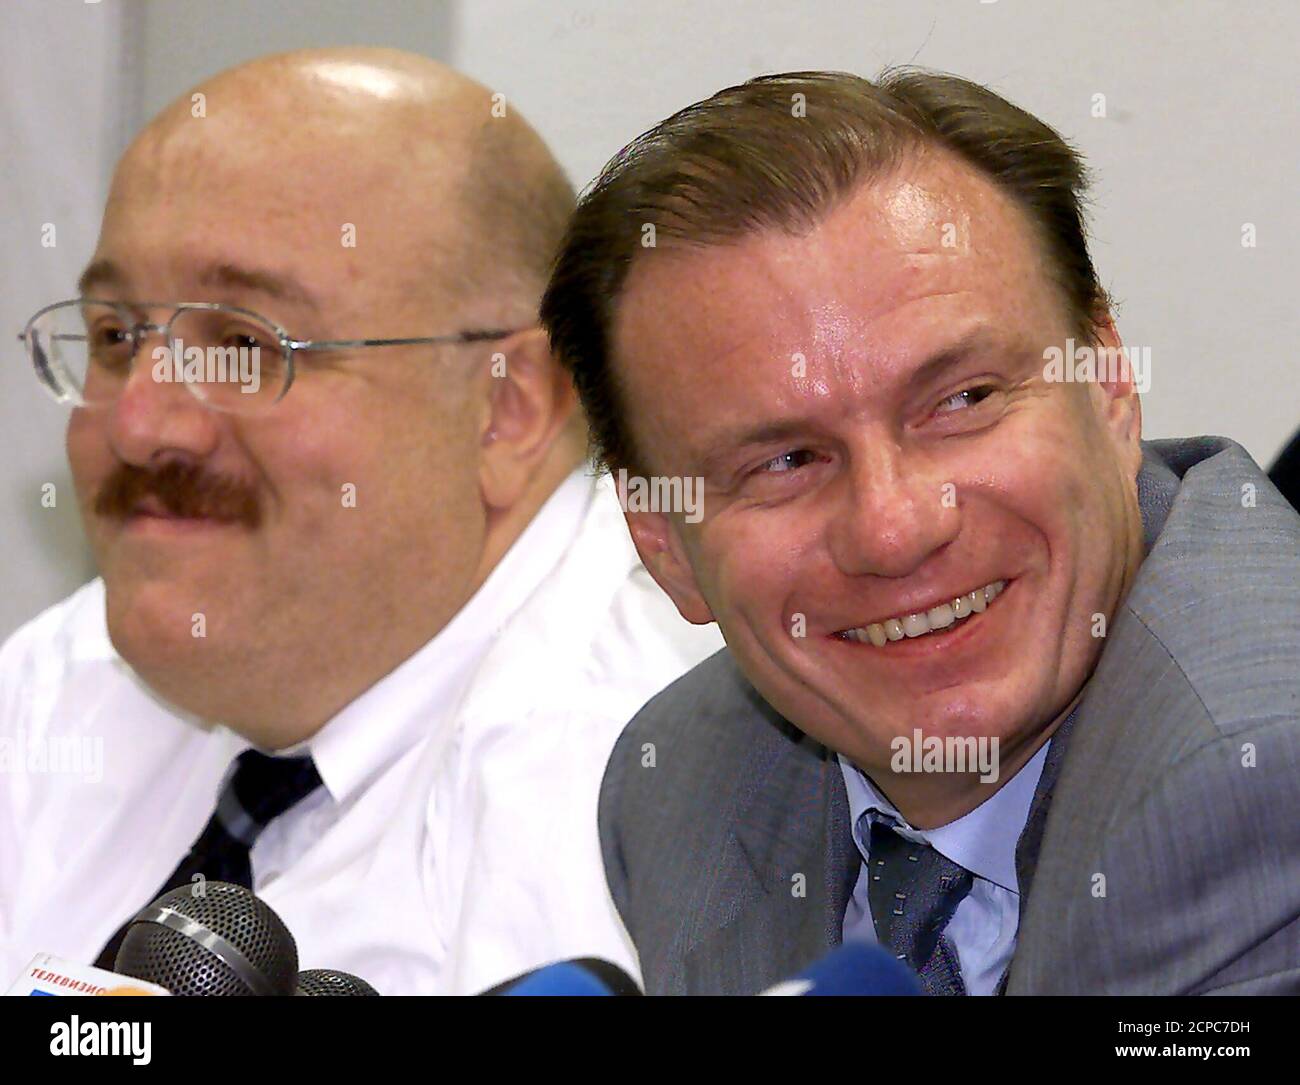 Vladimir Potanin (R), head of Interros holding company, and Kakha Bendukidze, president of heavy equipment maker Uralmash, smile as they answer journalists's question at a news conference in Moscow, July 28, 2000. The two businessmen had earlier attended a meeting with President Vladimir Putin and 19 other members of Russian business elite.  WAW/AA Stock Photo